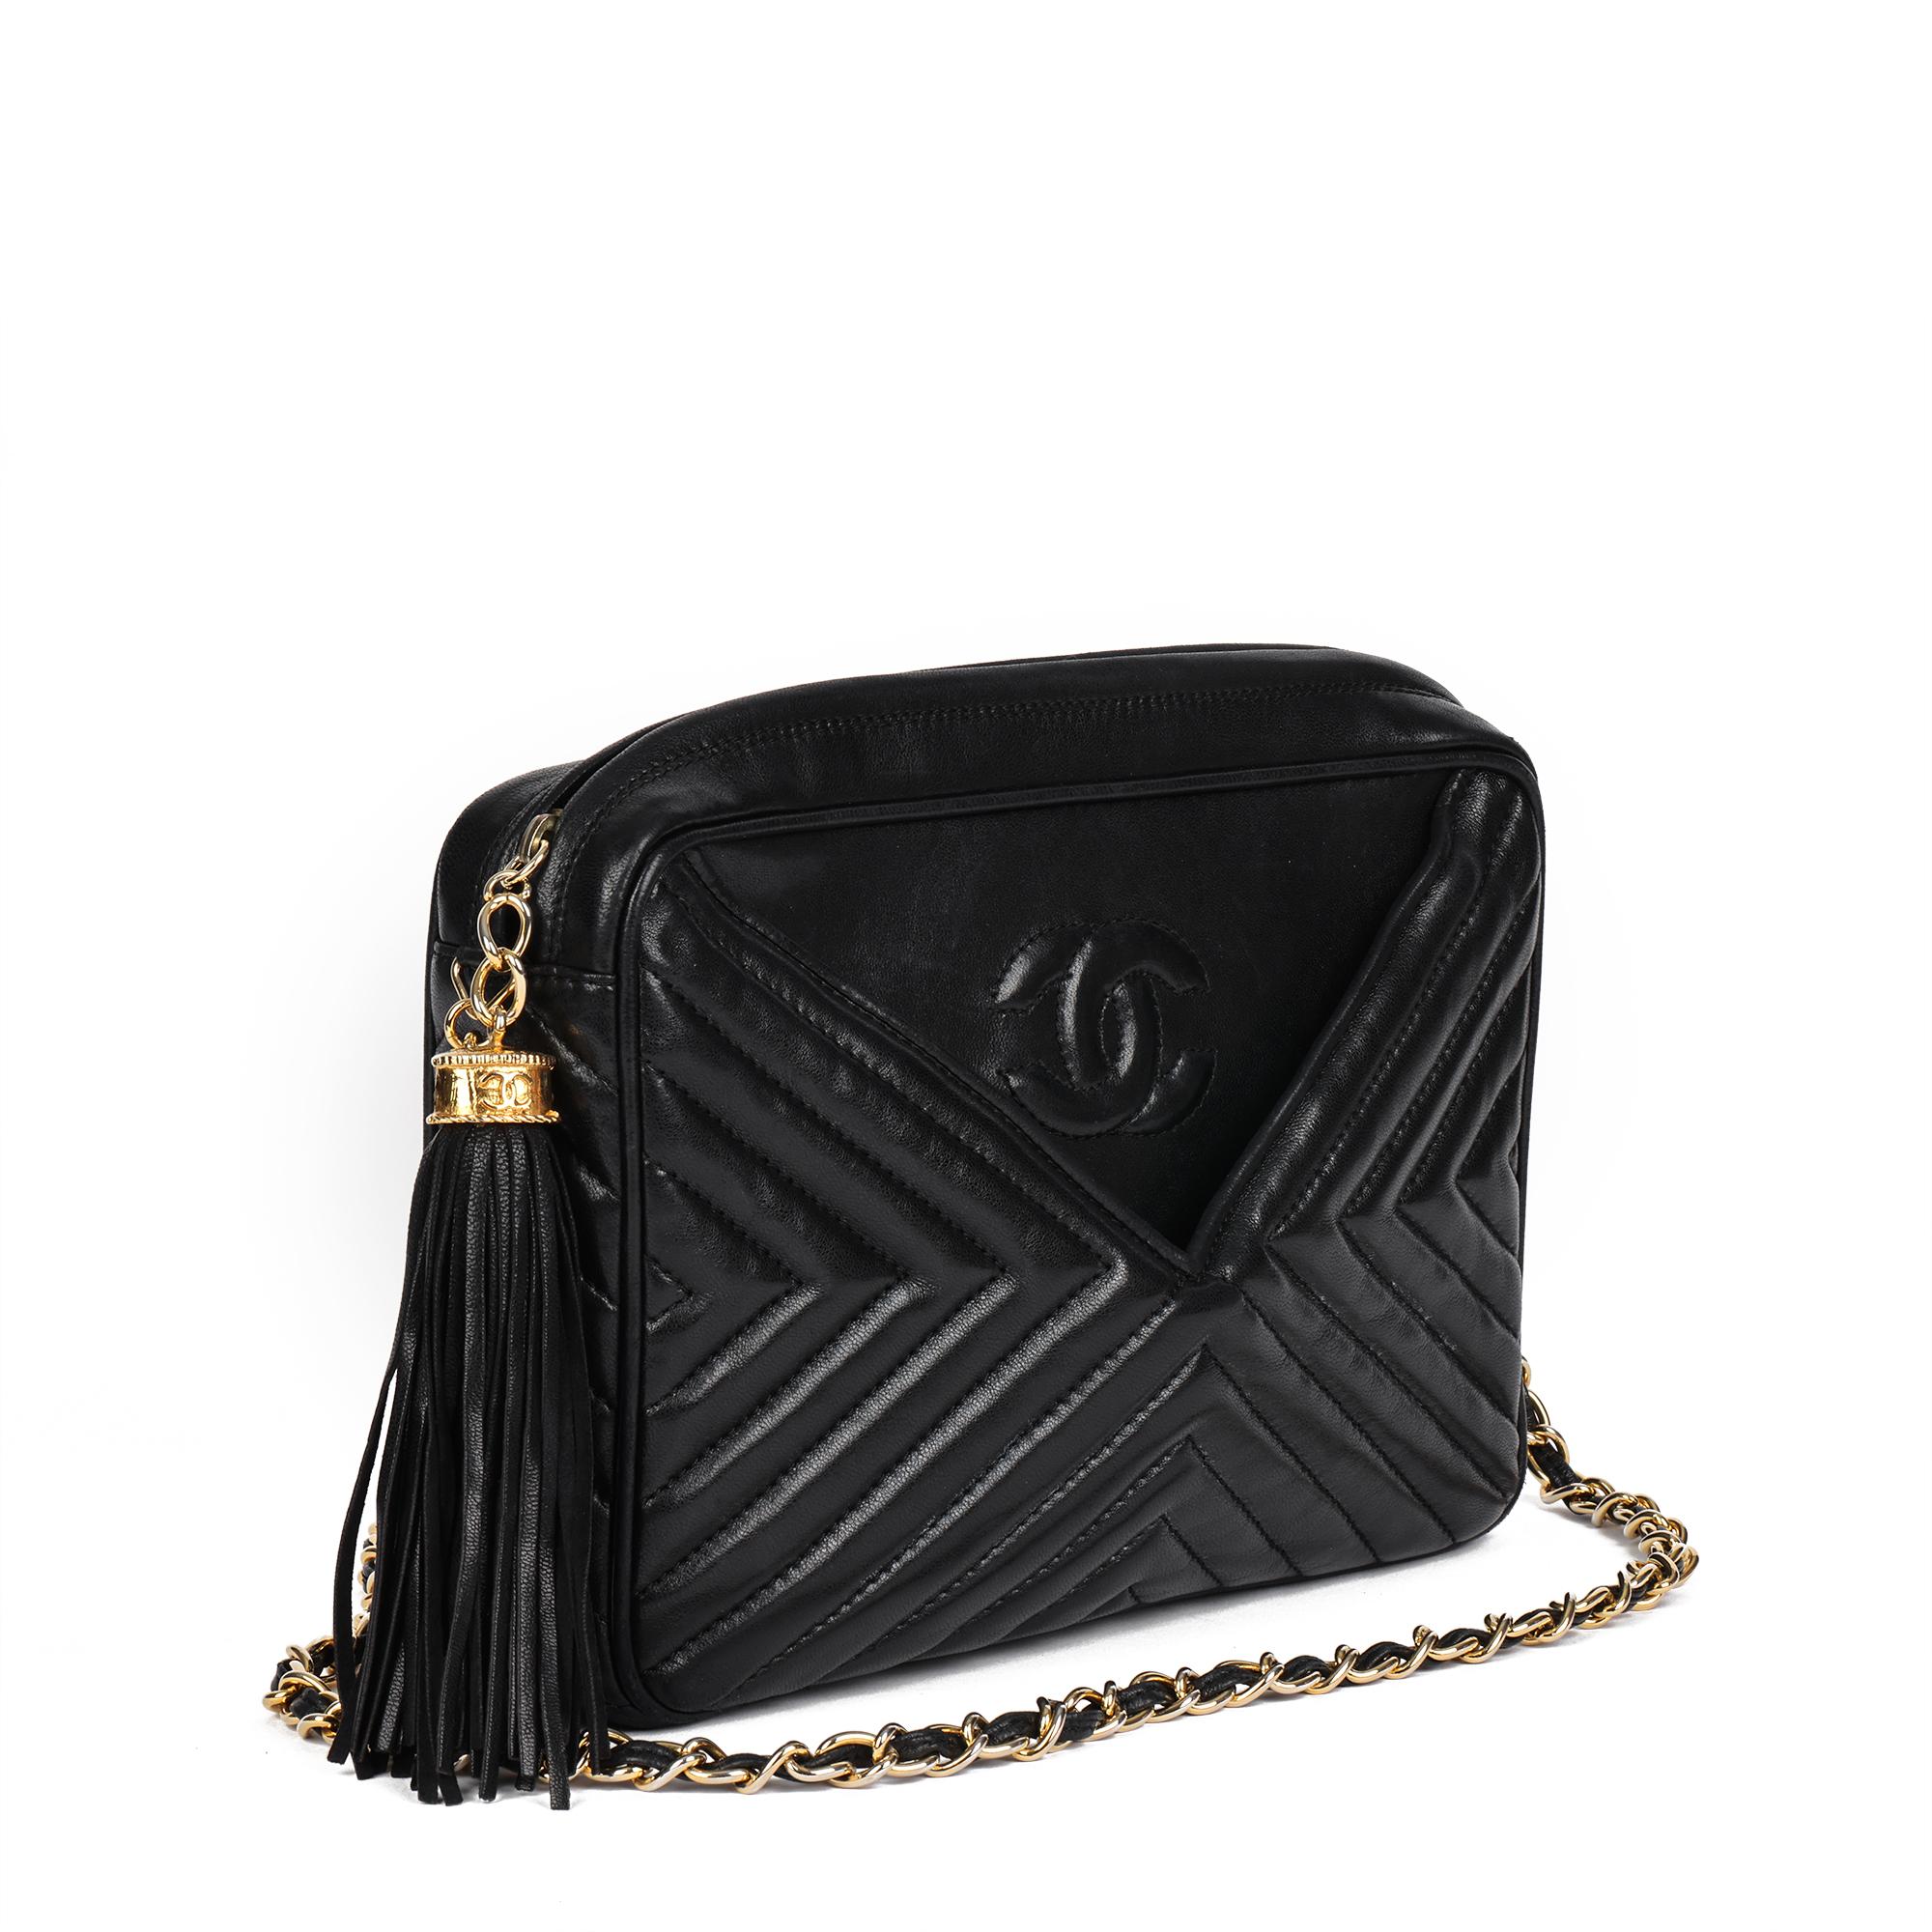 CHANEL
Black Chevron Quilted Lambskin Vintage Fringe Timeless Camera Bag

Xupes Reference: CB735
Serial Number: 749420
Age (Circa): 1988
Accompanied By: Chanel Dust Bag
Authenticity Details: Serial Sticker (Made in Italy)
Gender: Ladies
Type: